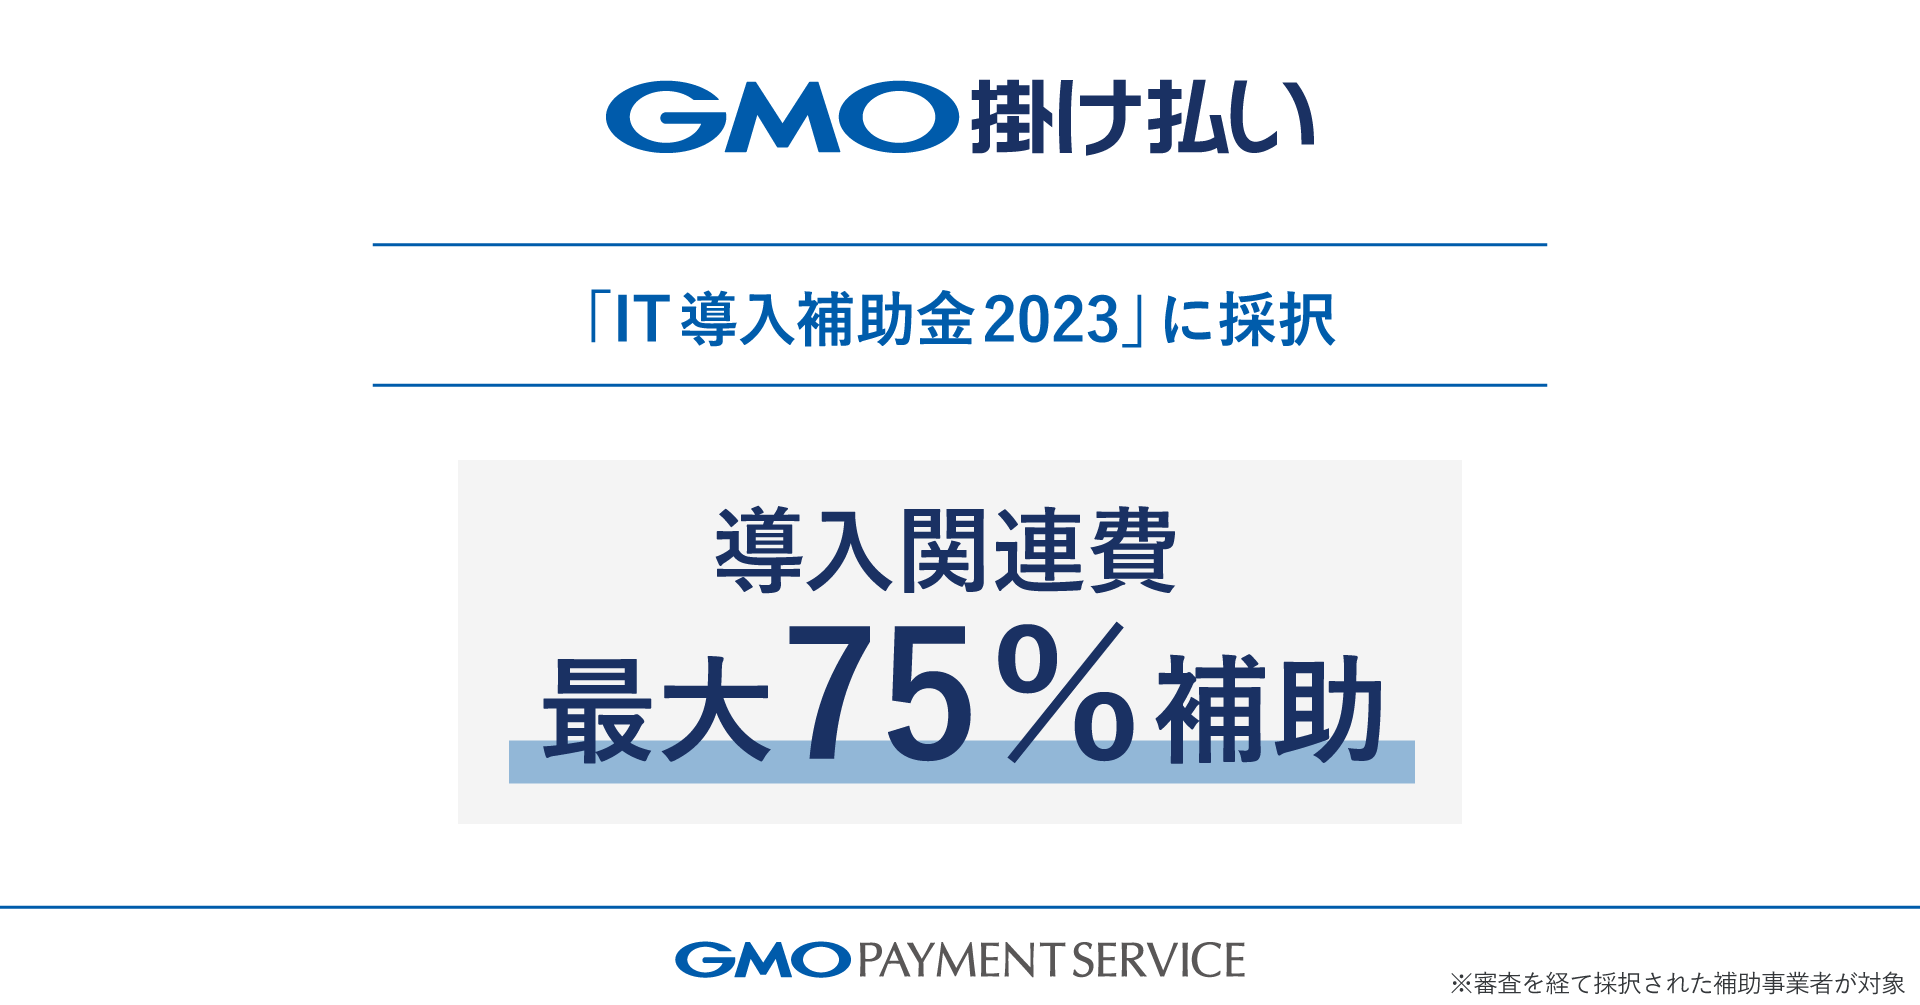 【GMO-PS】Receiving up to 75% subsidy, it is possible to introduce "GMO B2B Pay on Credit"